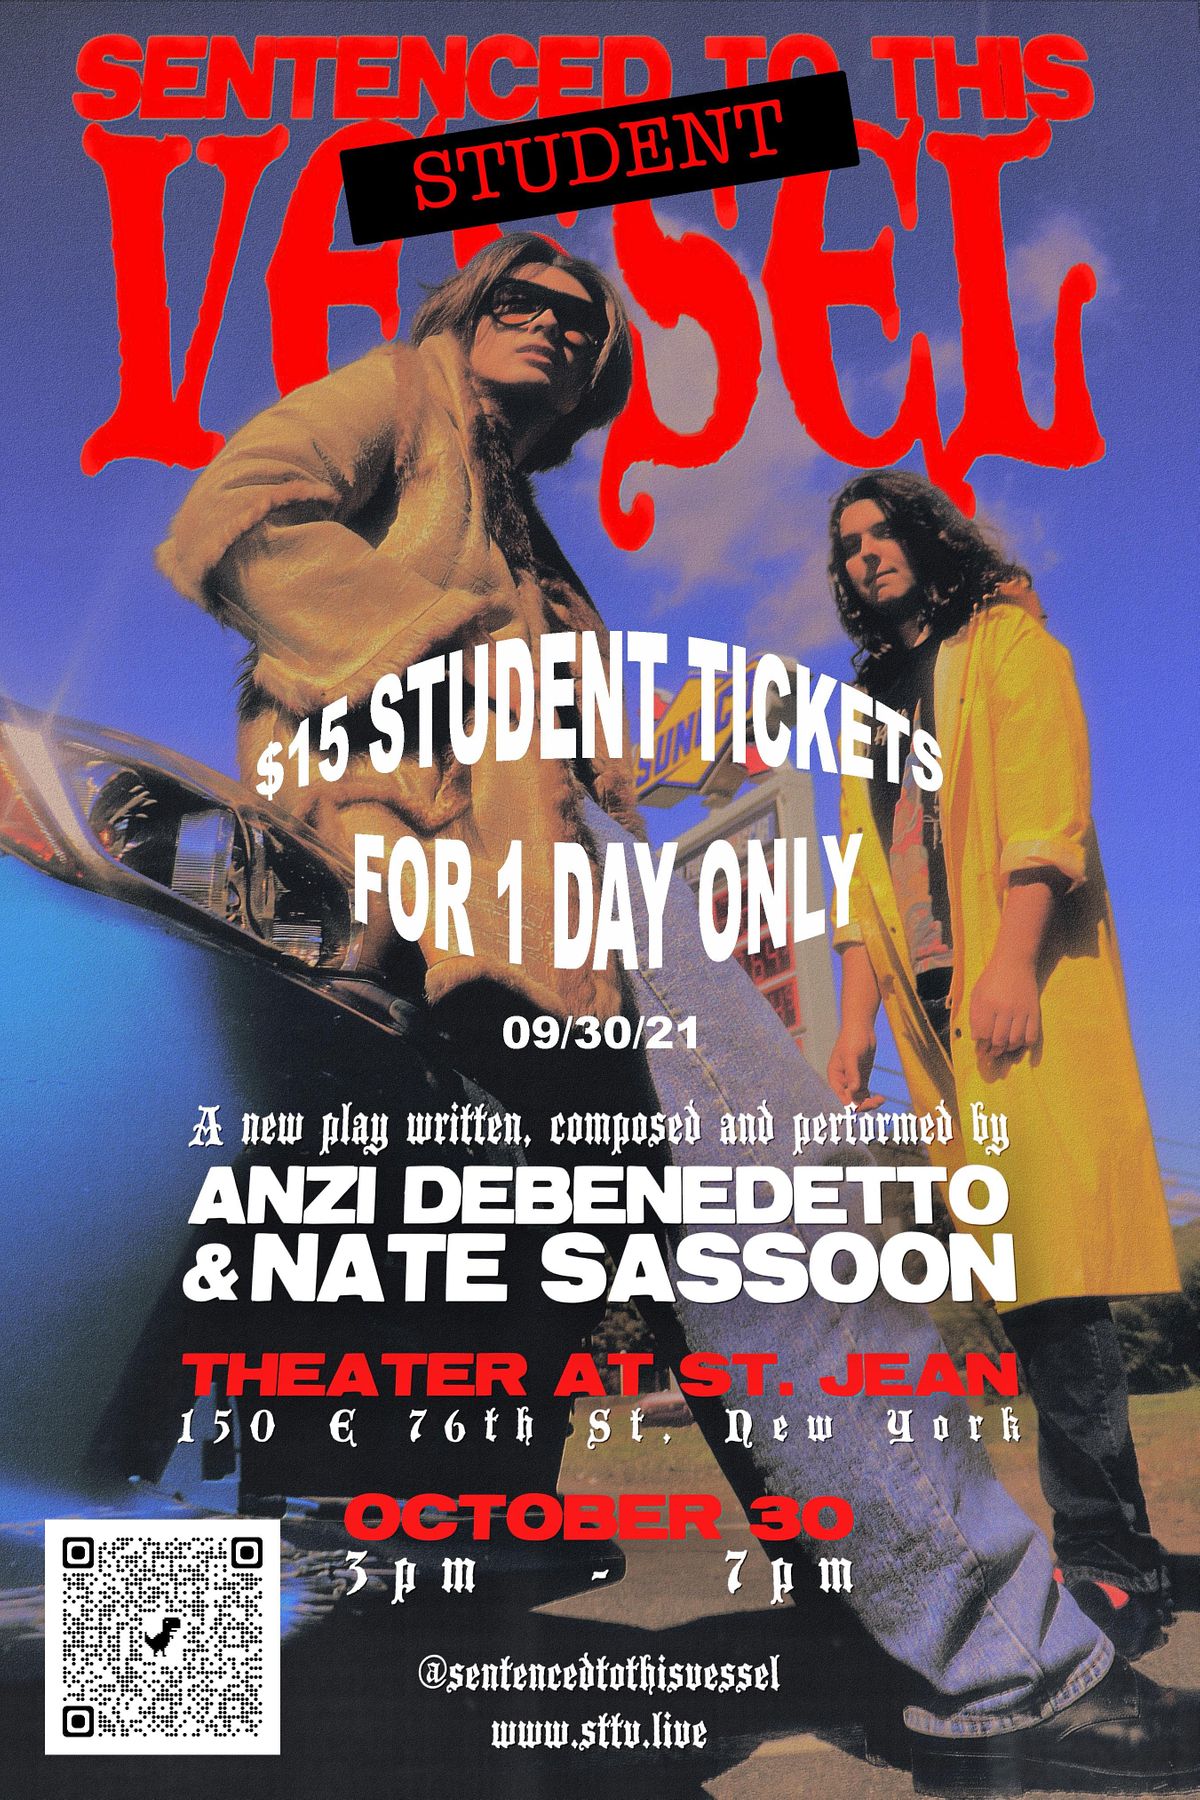 Sentenced To This Student Vessel - STUDENT TICKETS